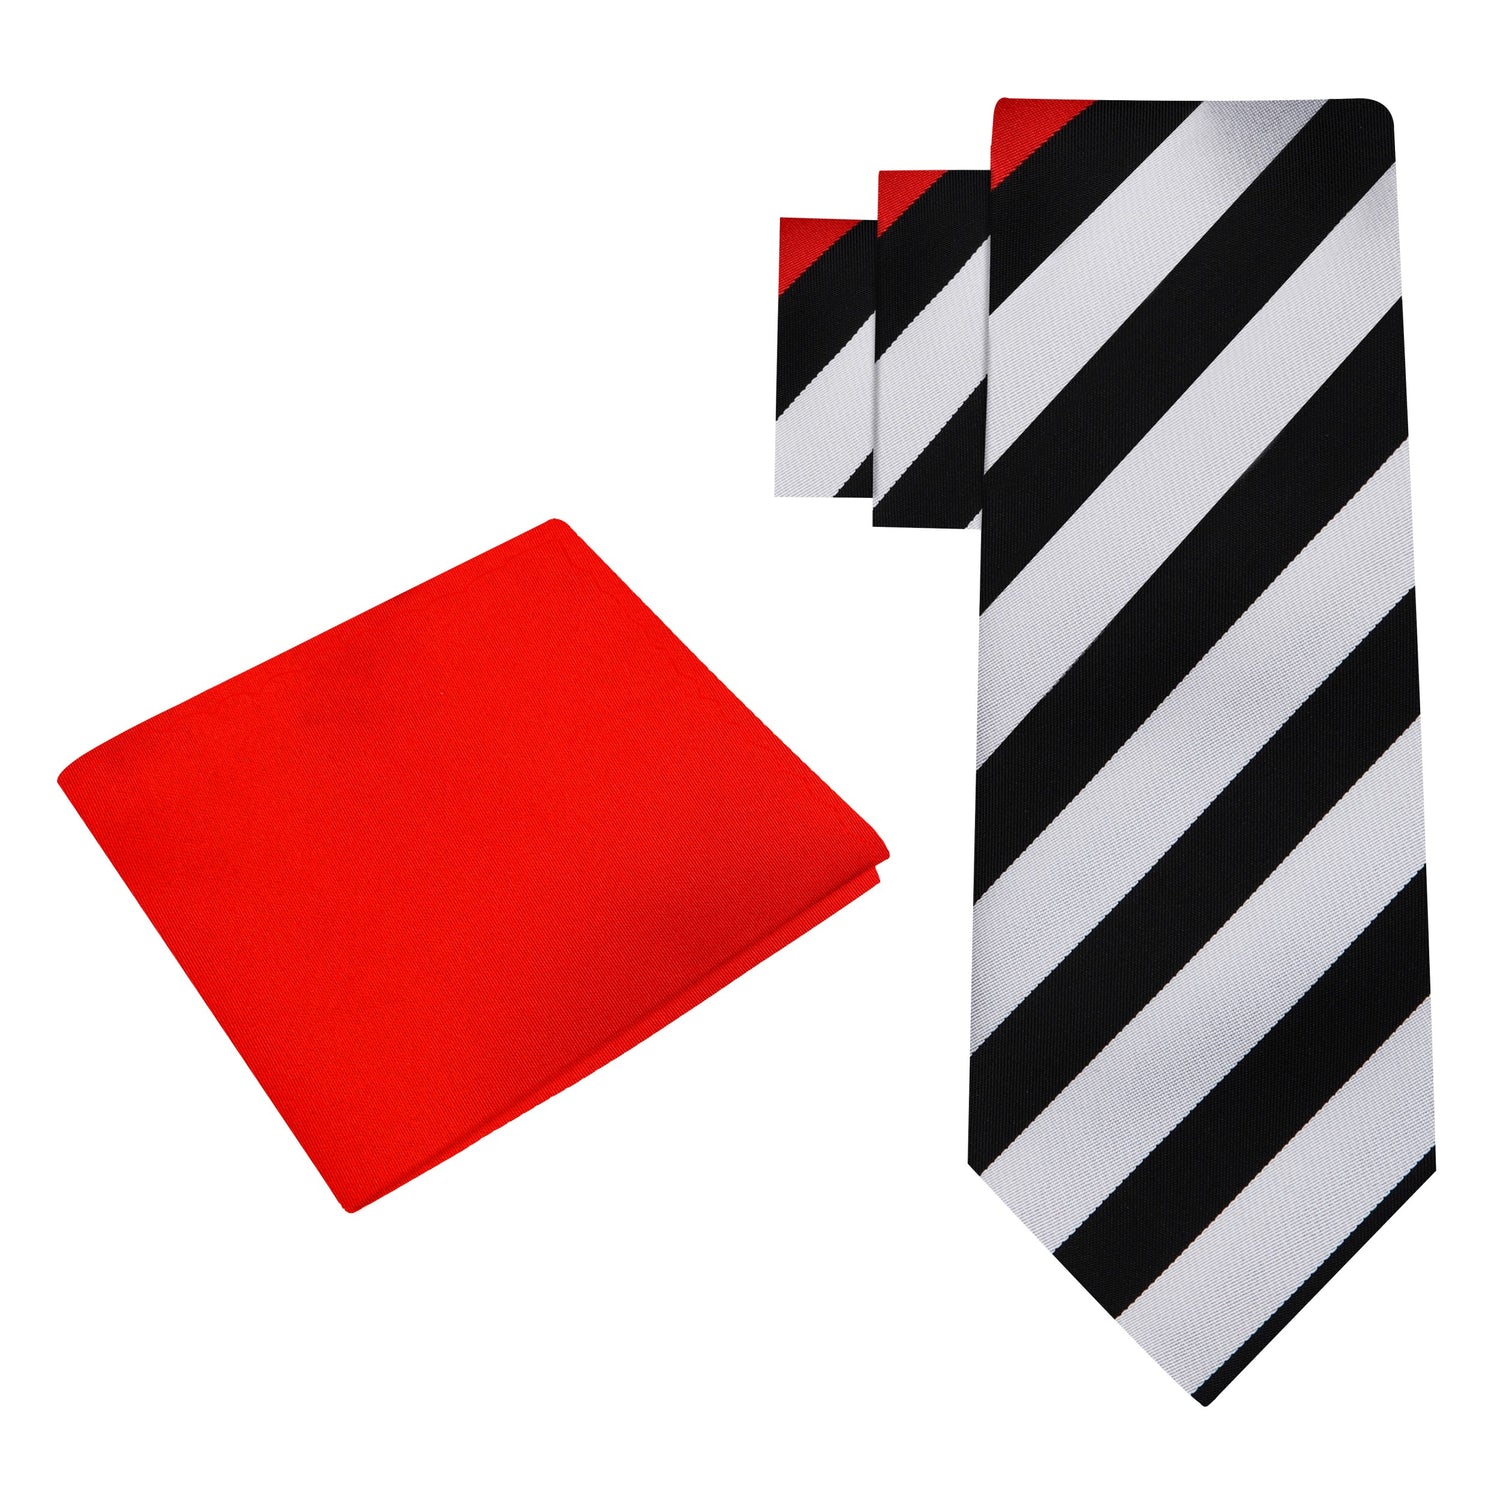 Alt View: Red black stars and stripes tie and square